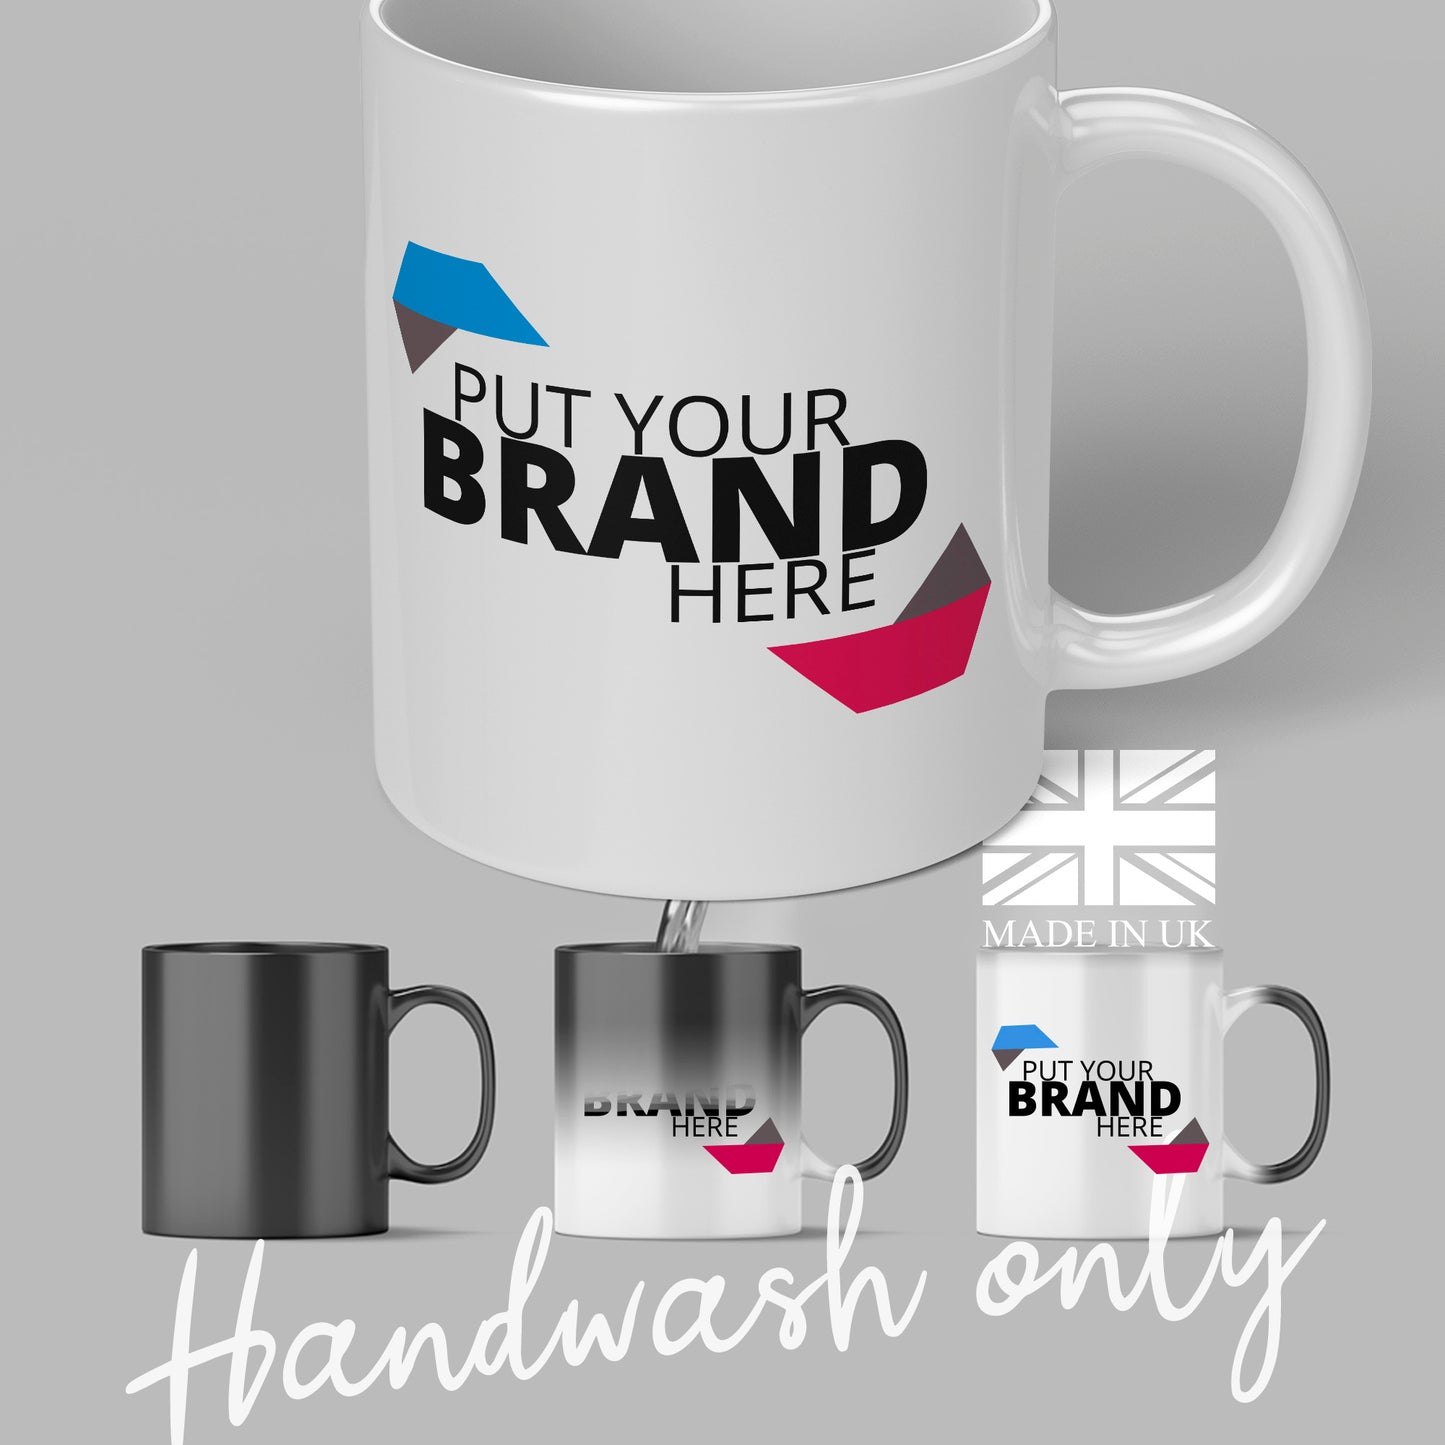 Branded Mugs (Magic Colour Change) - Fully Inclusive Pricing Full Colour Both Sides &  Free Delivery